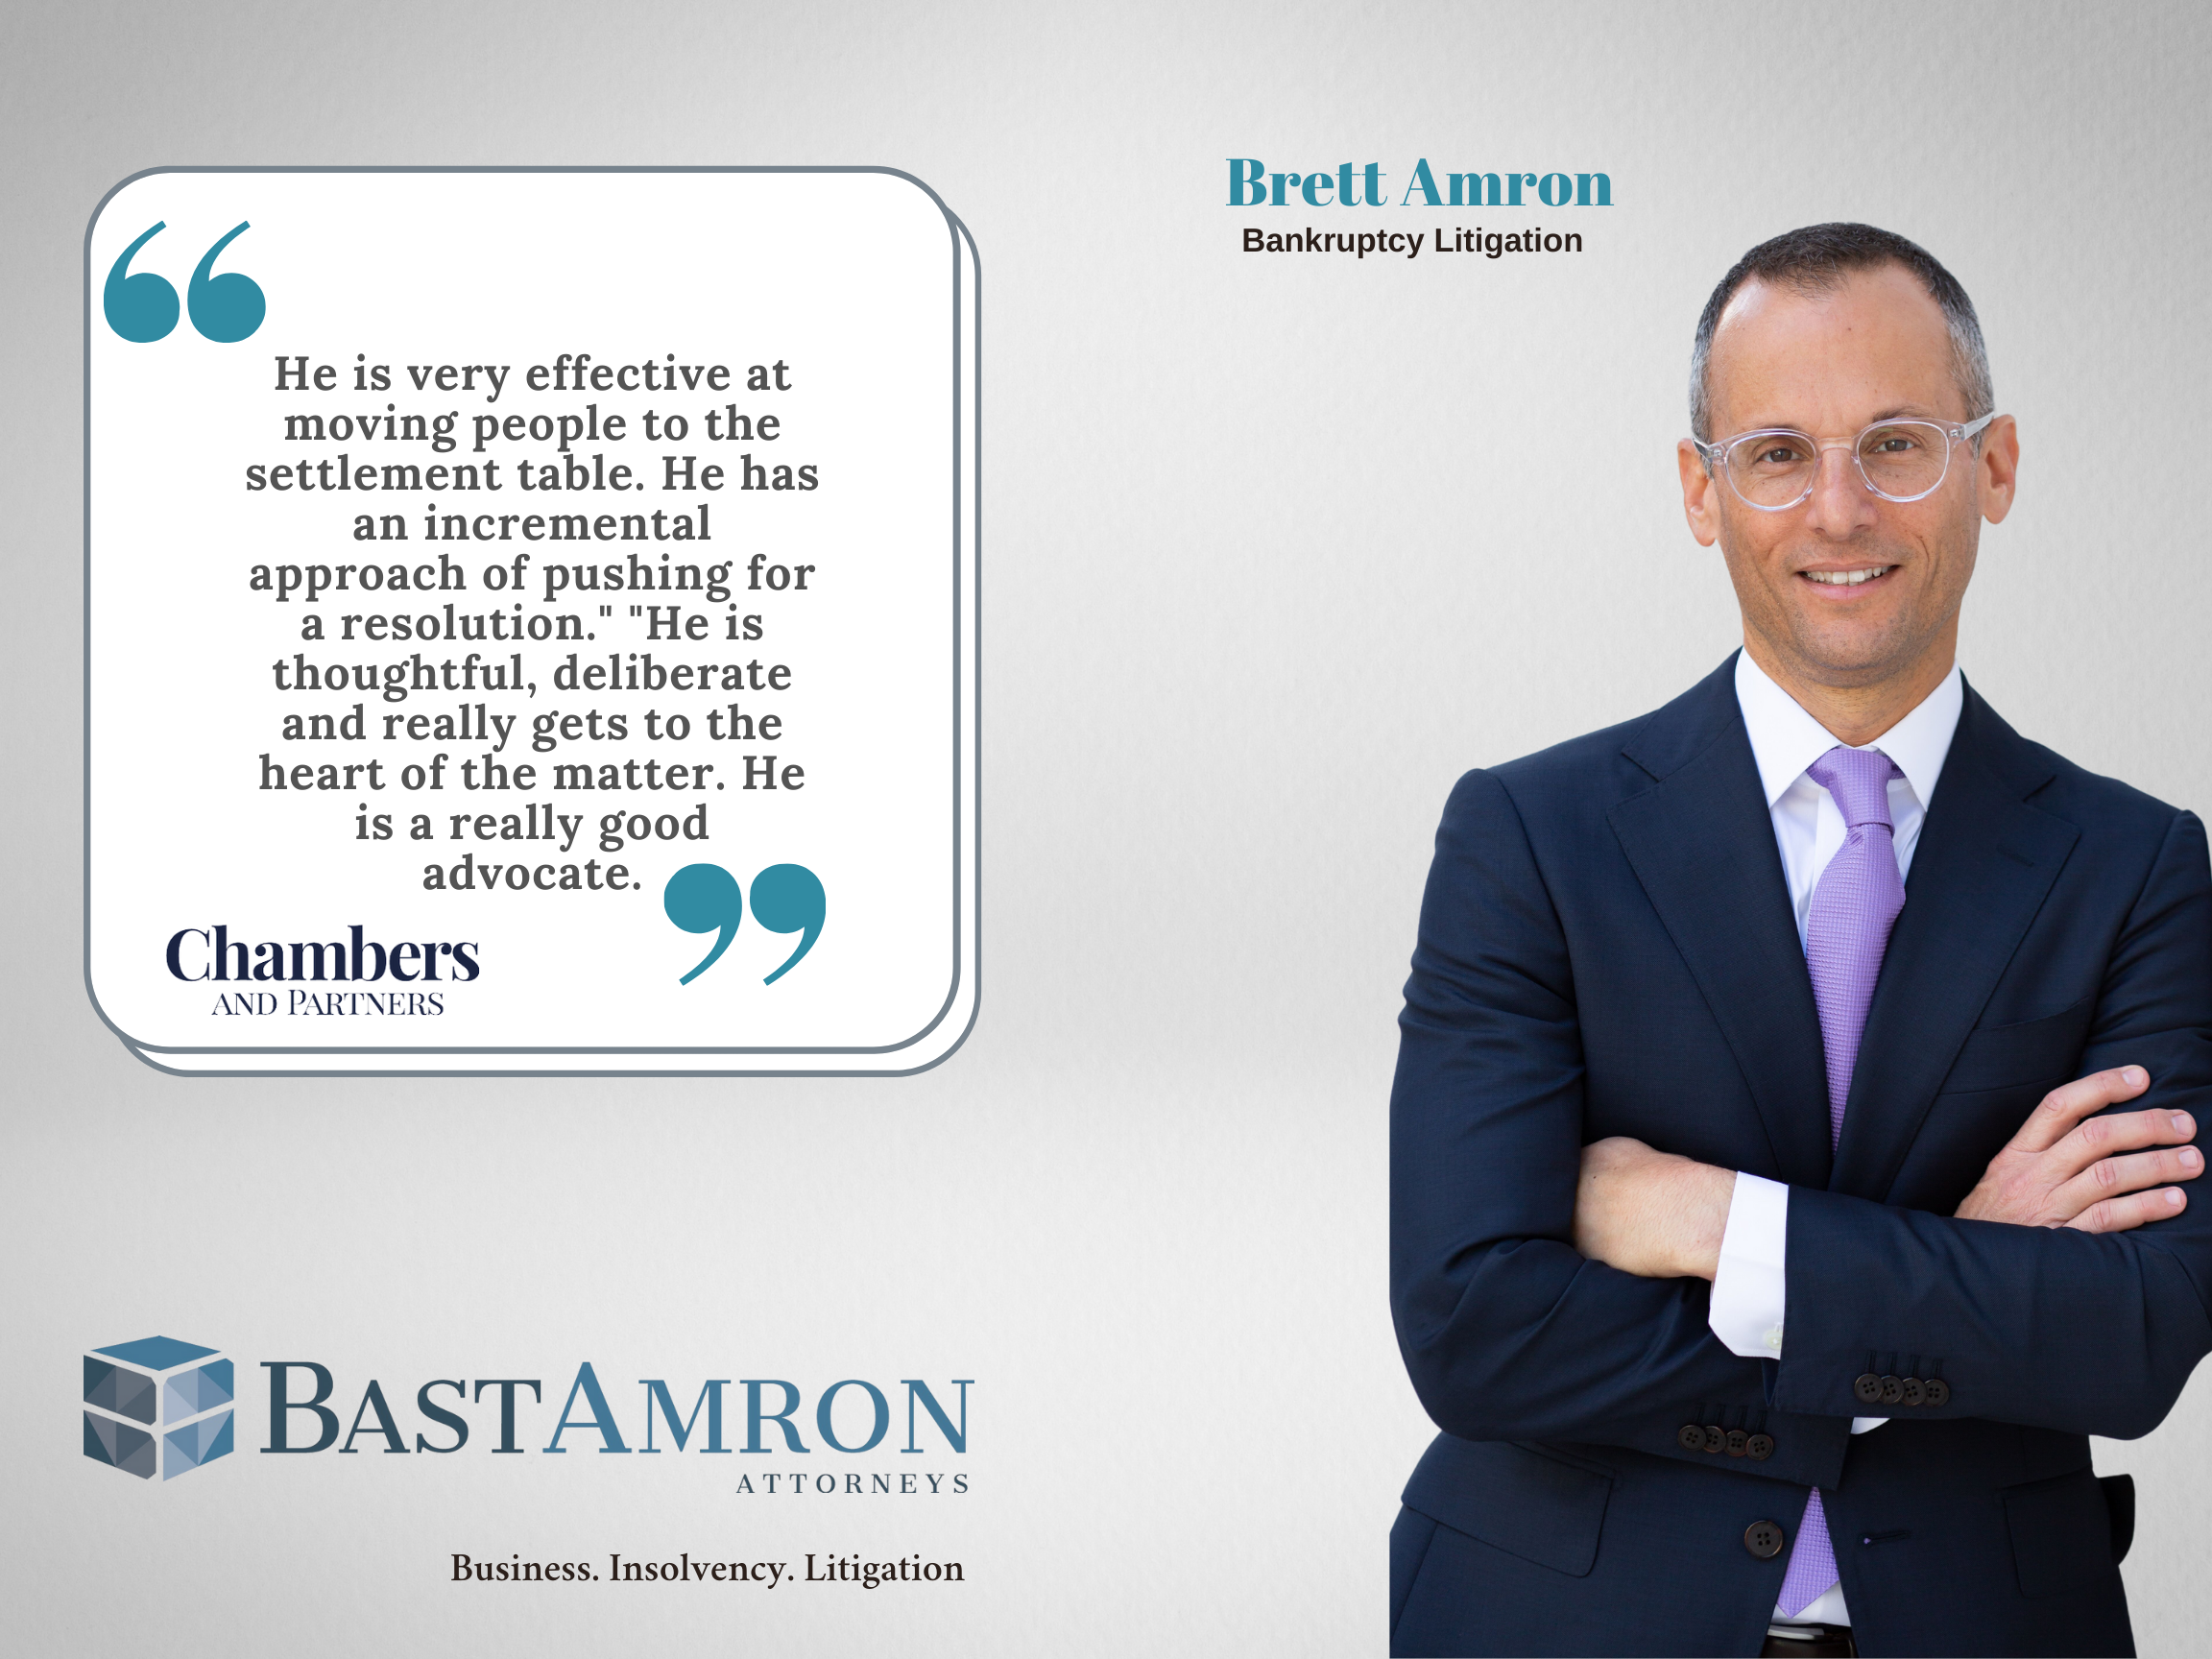 Chambers and Partners recognizes Brett M. Amron as a leader in Bankruptcy Litigation